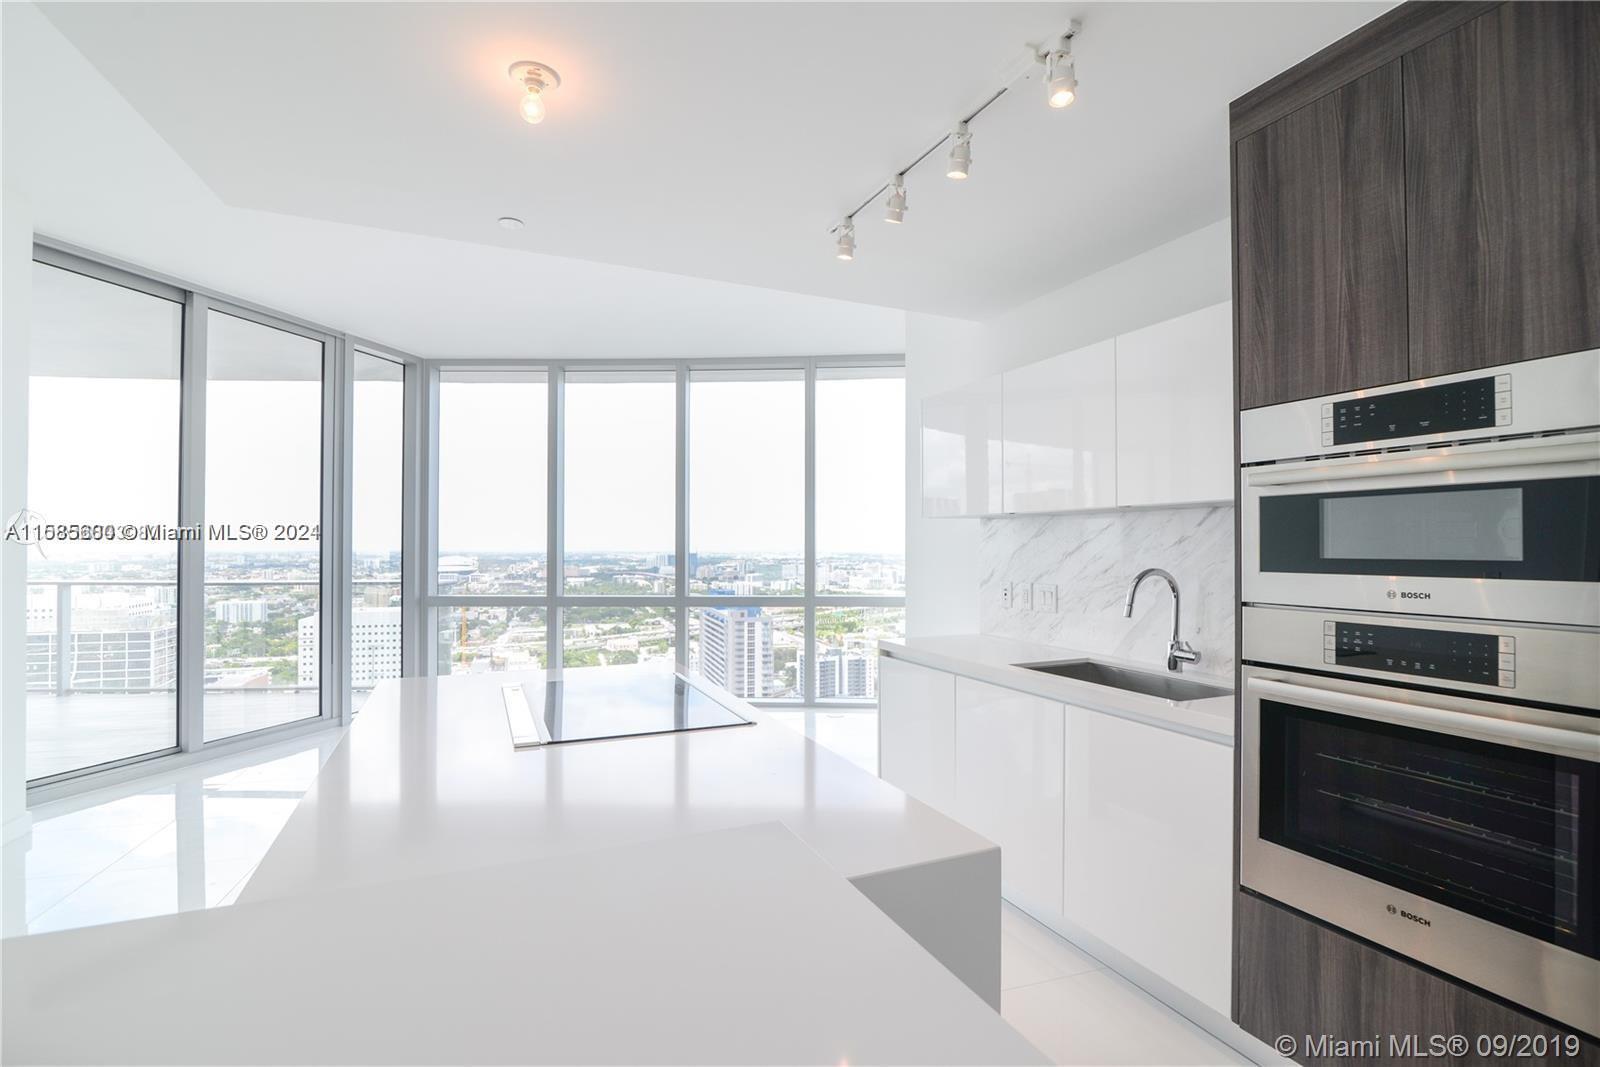 Tenants in place . Available from Jun 1. 1bed plus den with two full bath condo with private elevator and foyer at Paramount Miami World Centre. Features include: 10 ft high ceilings, floor to ceiling windows, state of the art kitchen with Bosch and Sub Zero appliances, white tile floors, custom closets, black out blinds and more. Have access to amazing amenities including boxing, soccer, state of the art gym, 3 pools, basketball and more